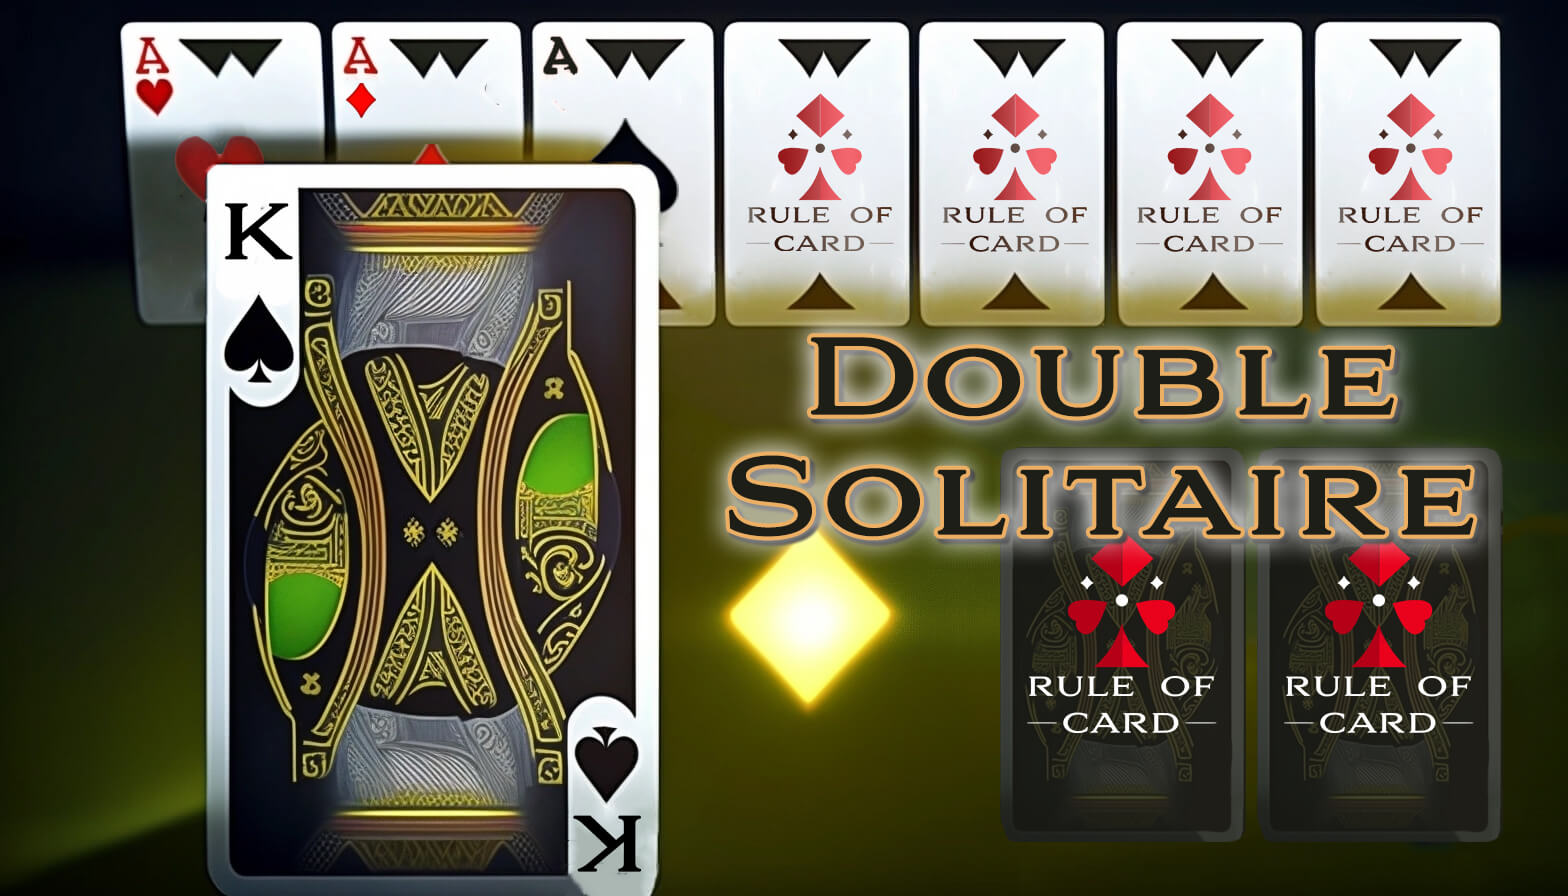 Playing the card game Double Solitaire